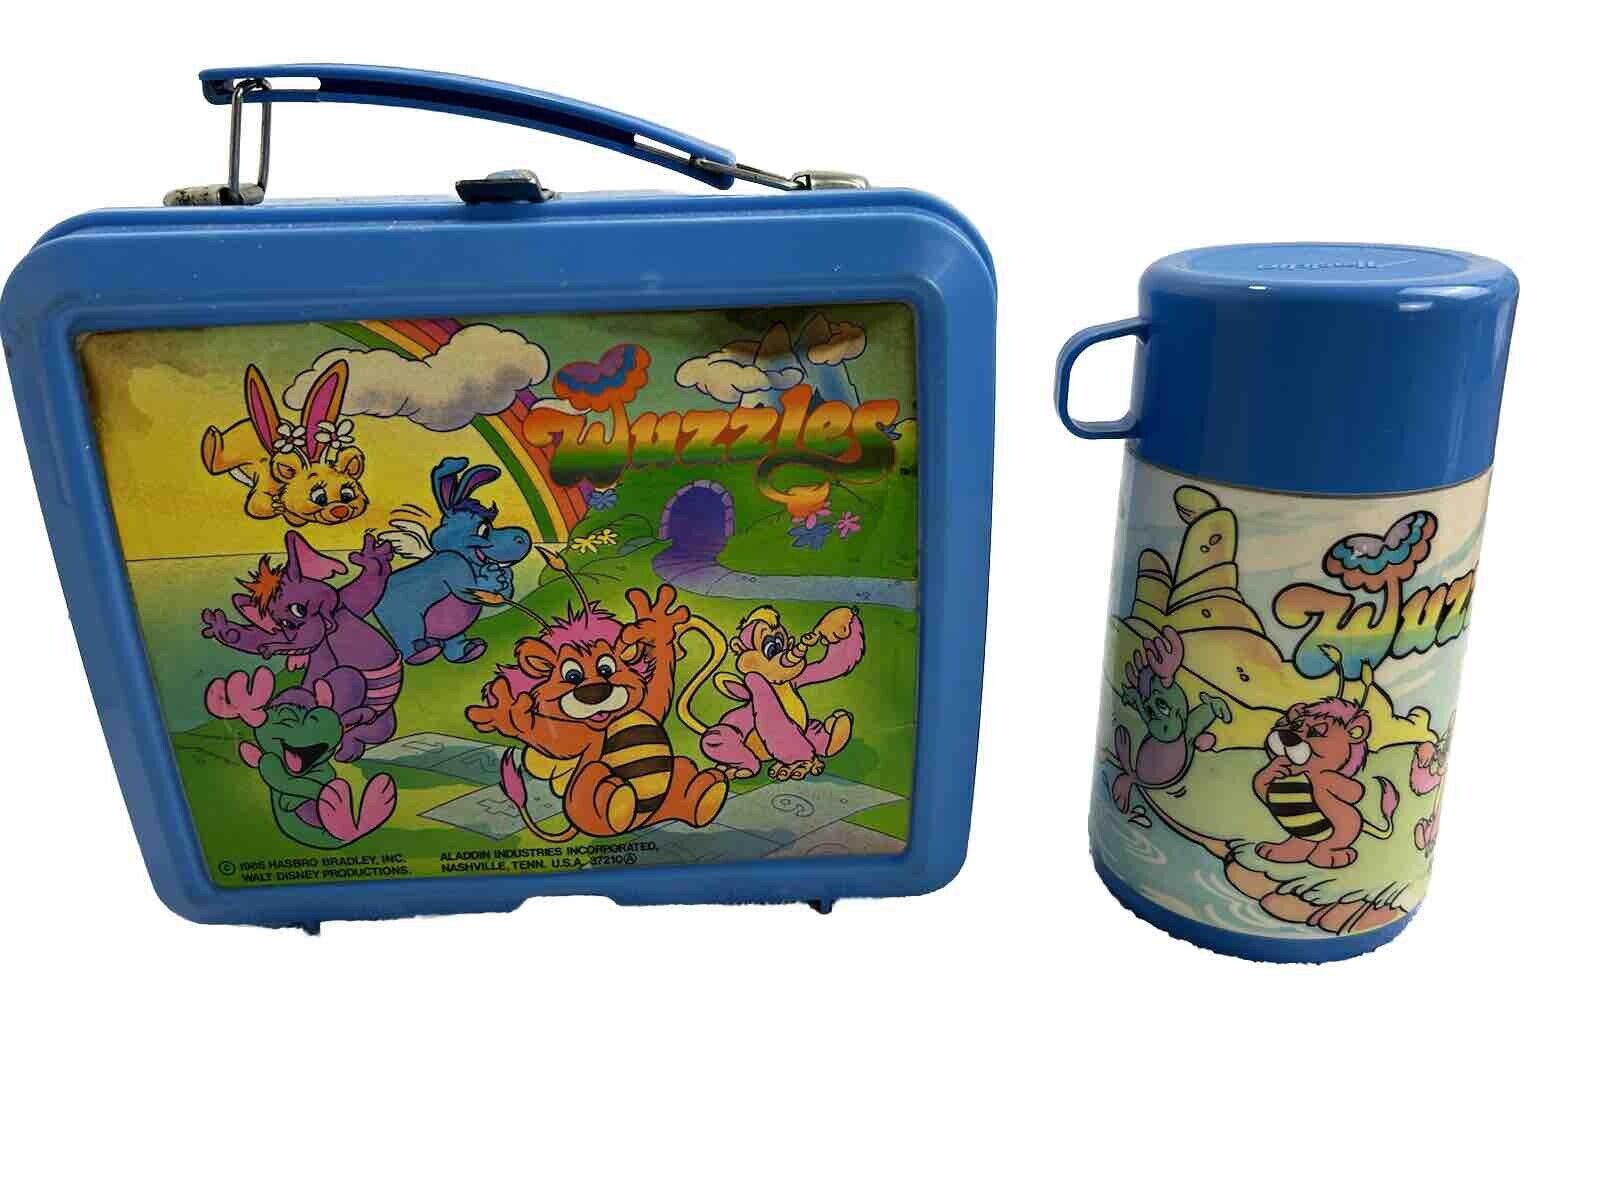  Vintage 1985 Walt Disney Productions Wuzzles Lunch Box & Thermos